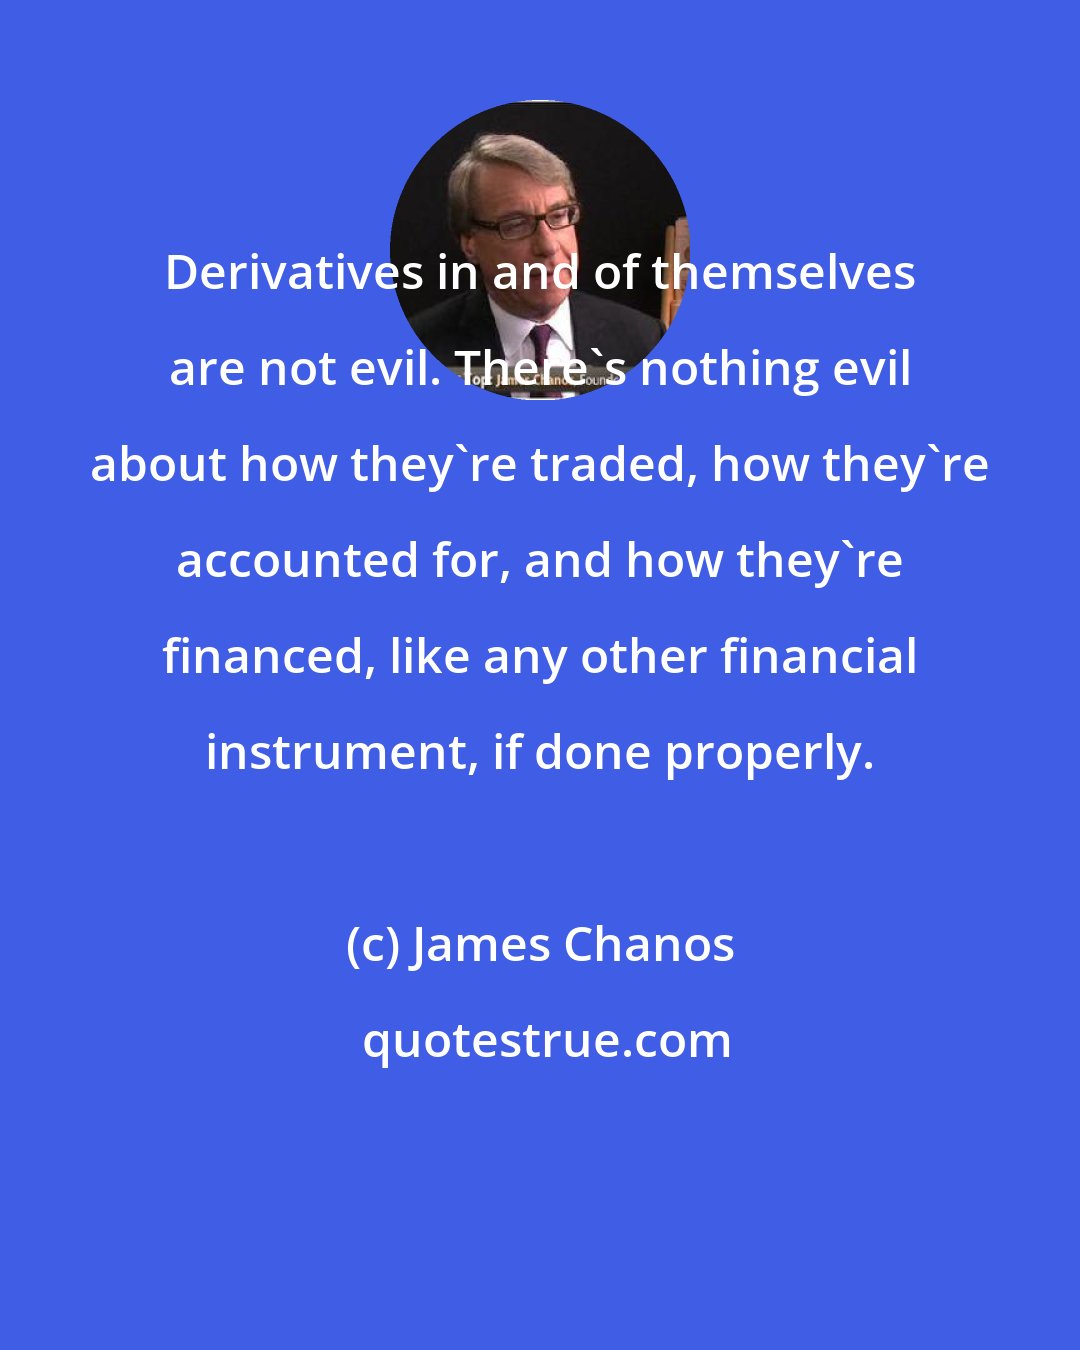 James Chanos: Derivatives in and of themselves are not evil. There's nothing evil about how they're traded, how they're accounted for, and how they're financed, like any other financial instrument, if done properly.